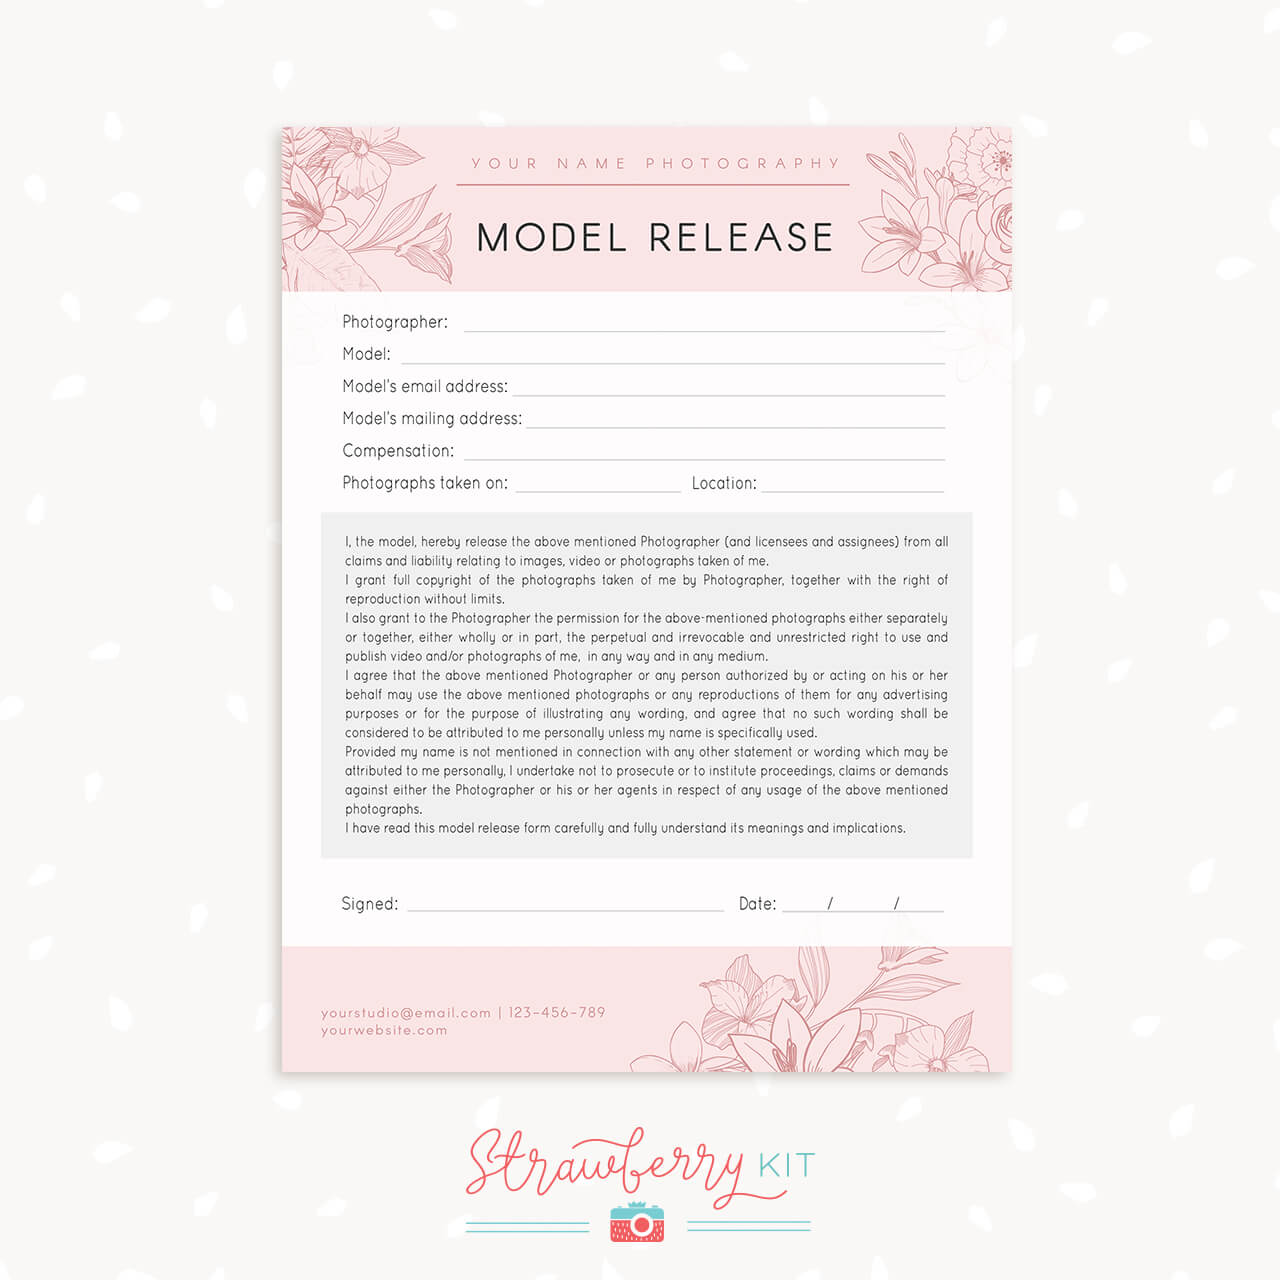 Photo Release Form Template from strawberrykit.com